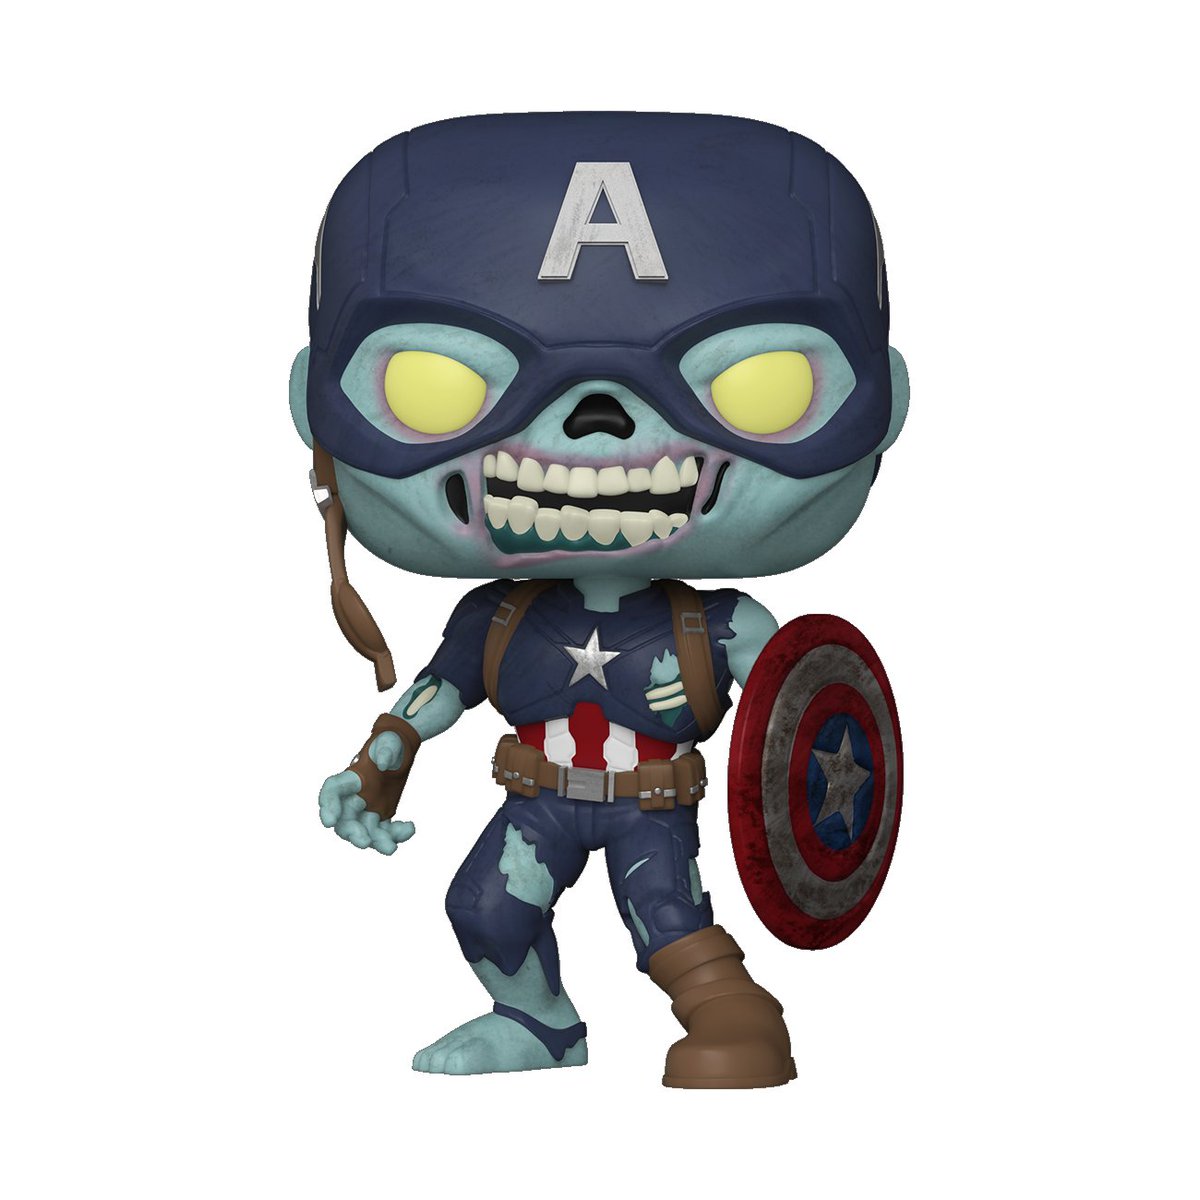 RT and follow @OriginalFunko for the chance to WIN this @GameStop exclusive Zombie Captain America Pop! Jumbo! #Funko #FunkoPop #Marvel @whatifofficial